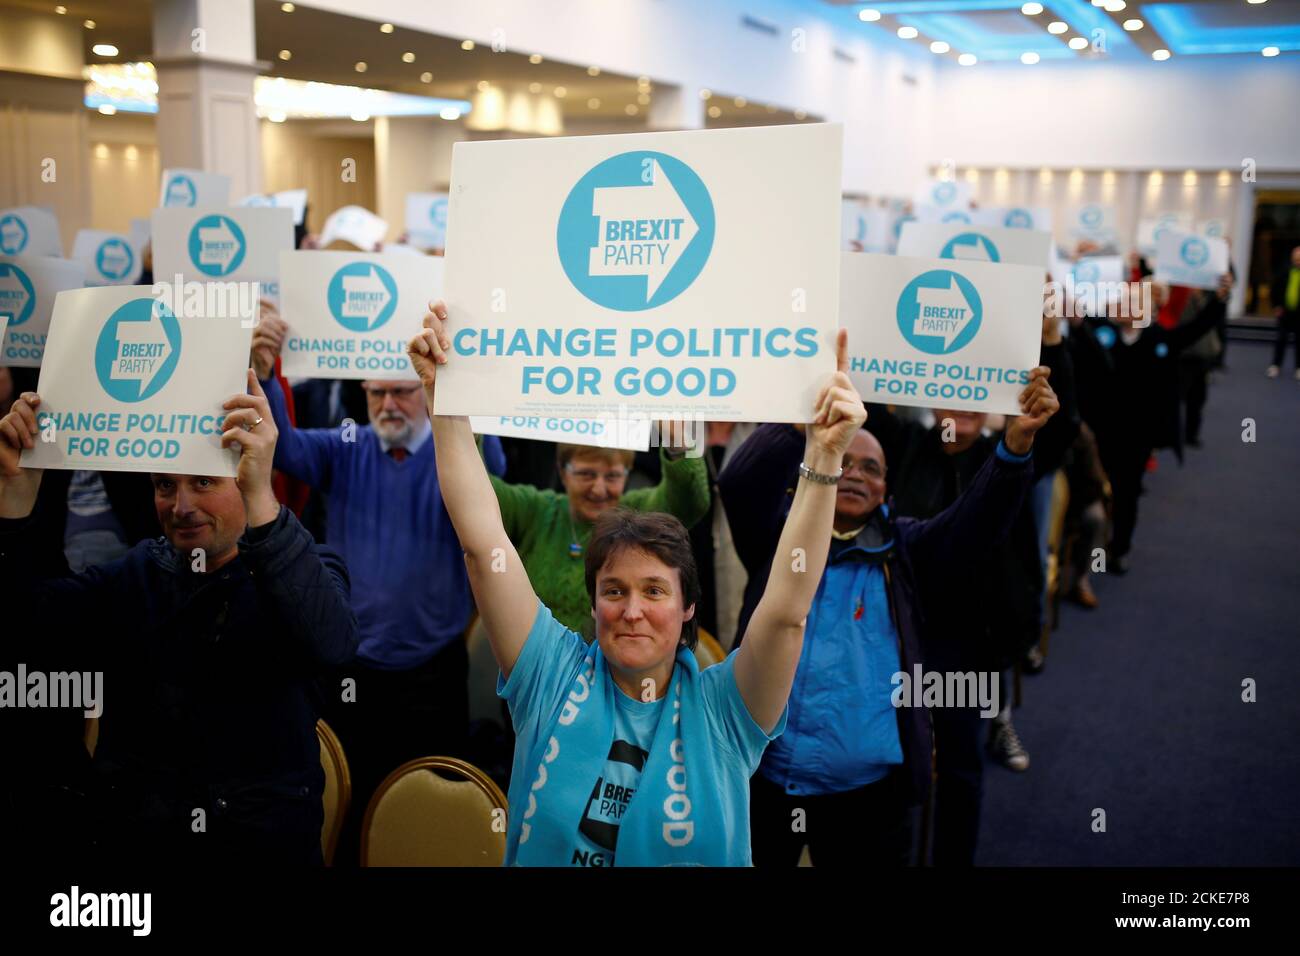 People attend the Brexit Party rally in Willenhall, Britain November 15, 2019. REUTERS/Henry Nicholls Stock Photo